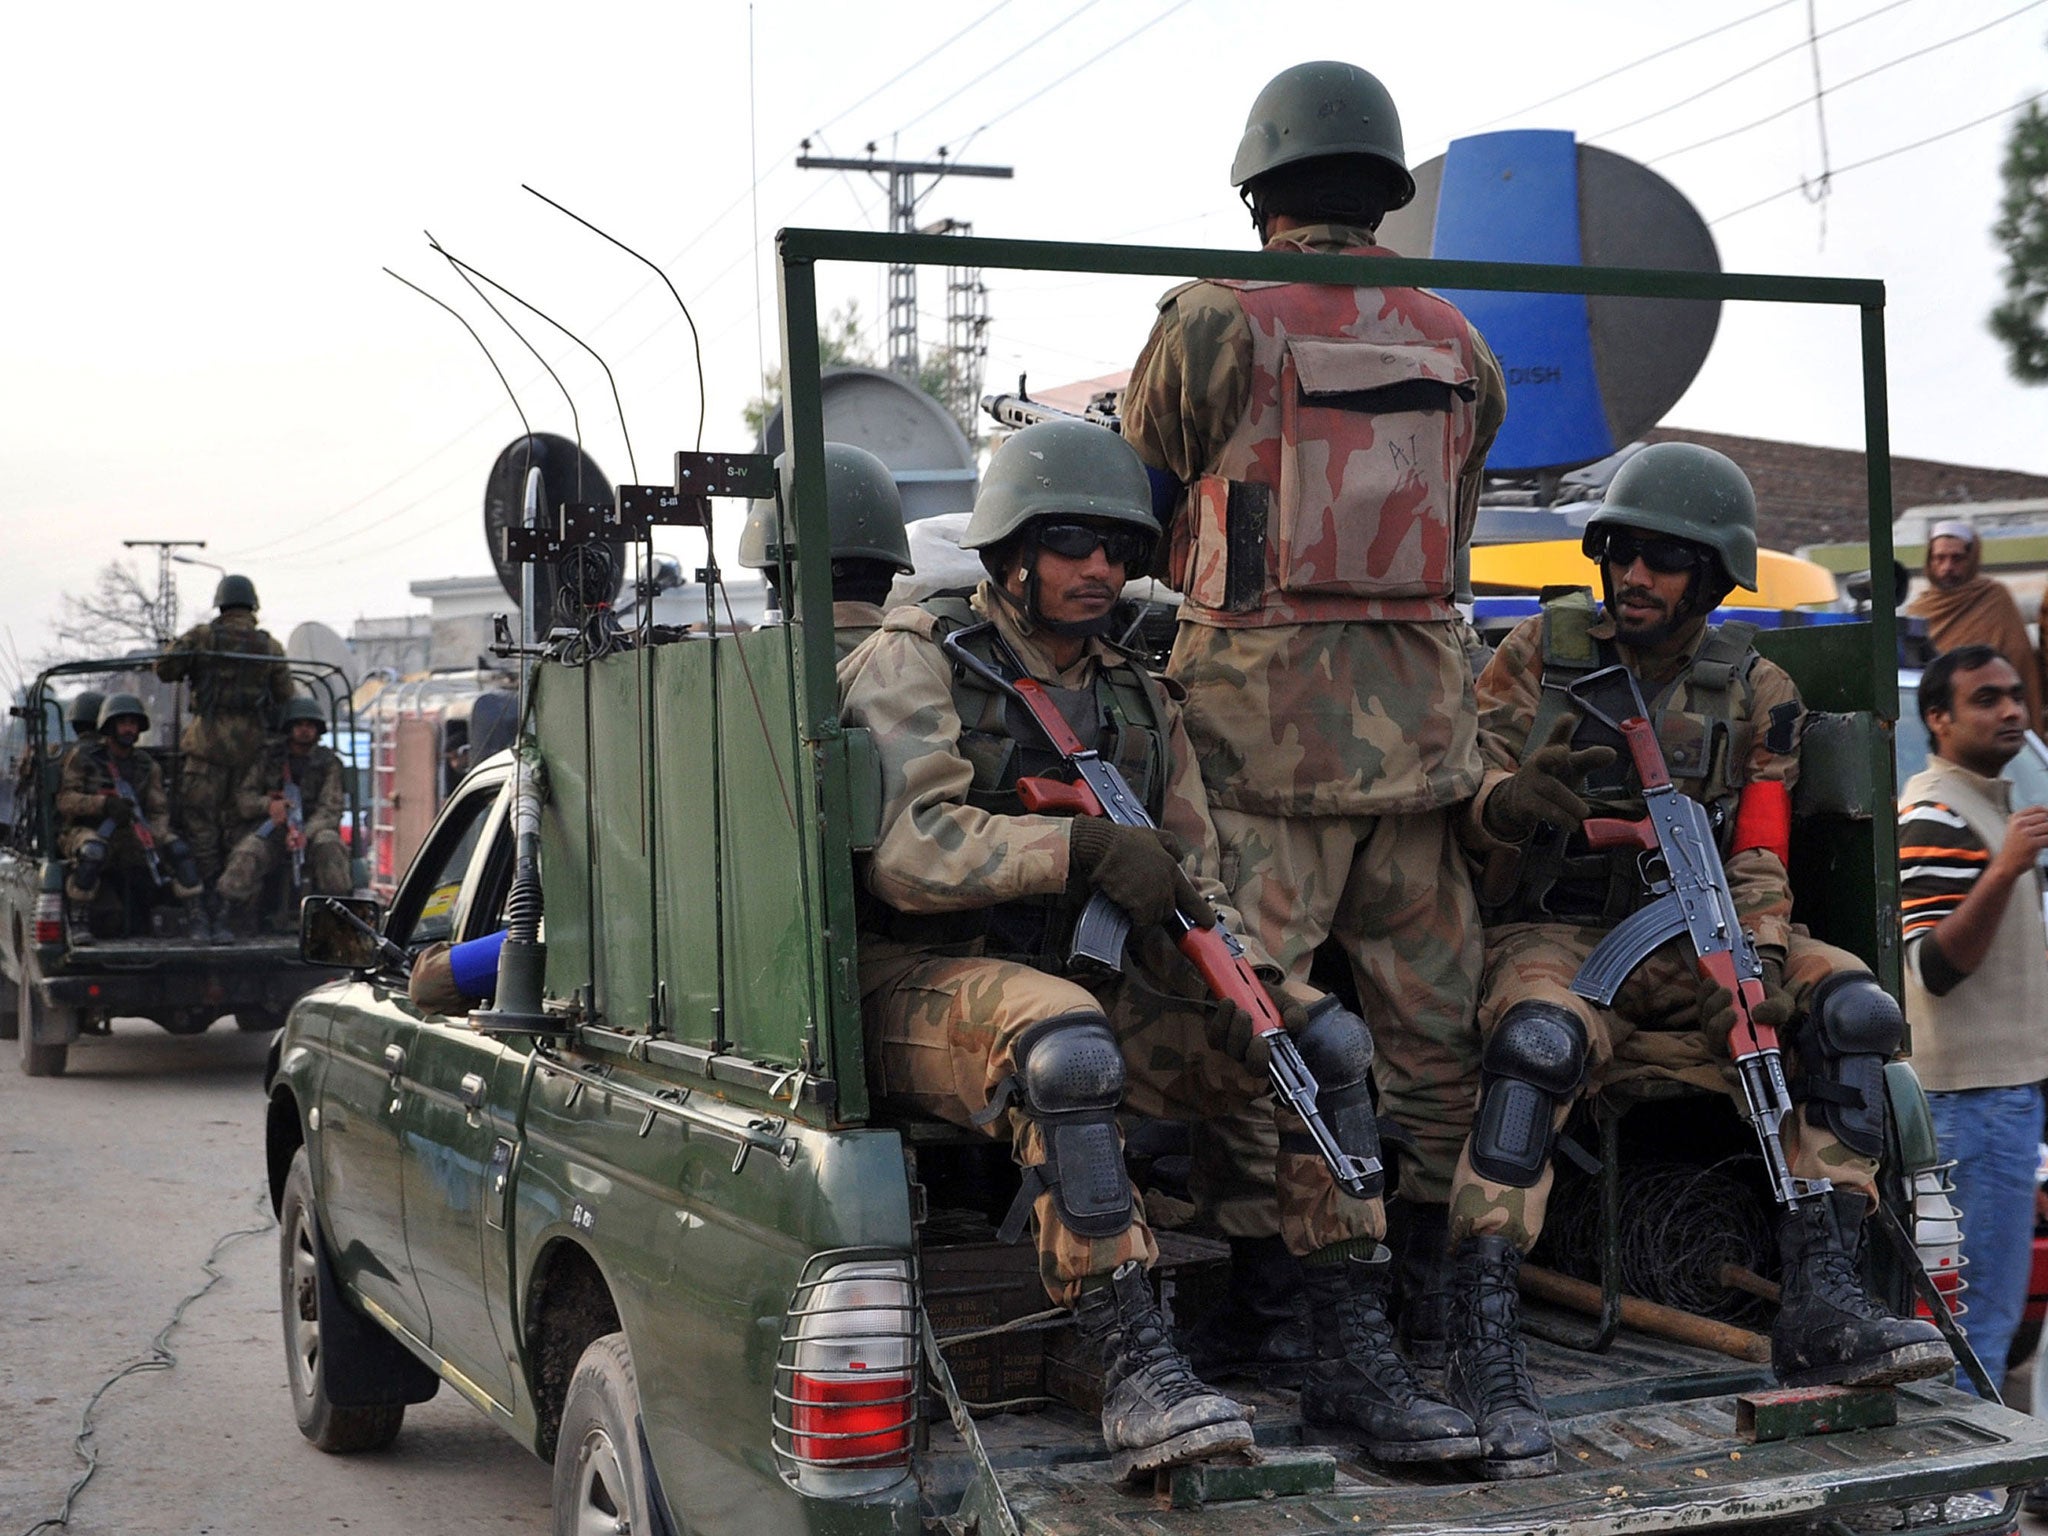 Pakistani army soldiers patrol outside the airport in Peshawar after the Pakistani Taliban claimed responsibility for suicide attack on an international airport earlier this month